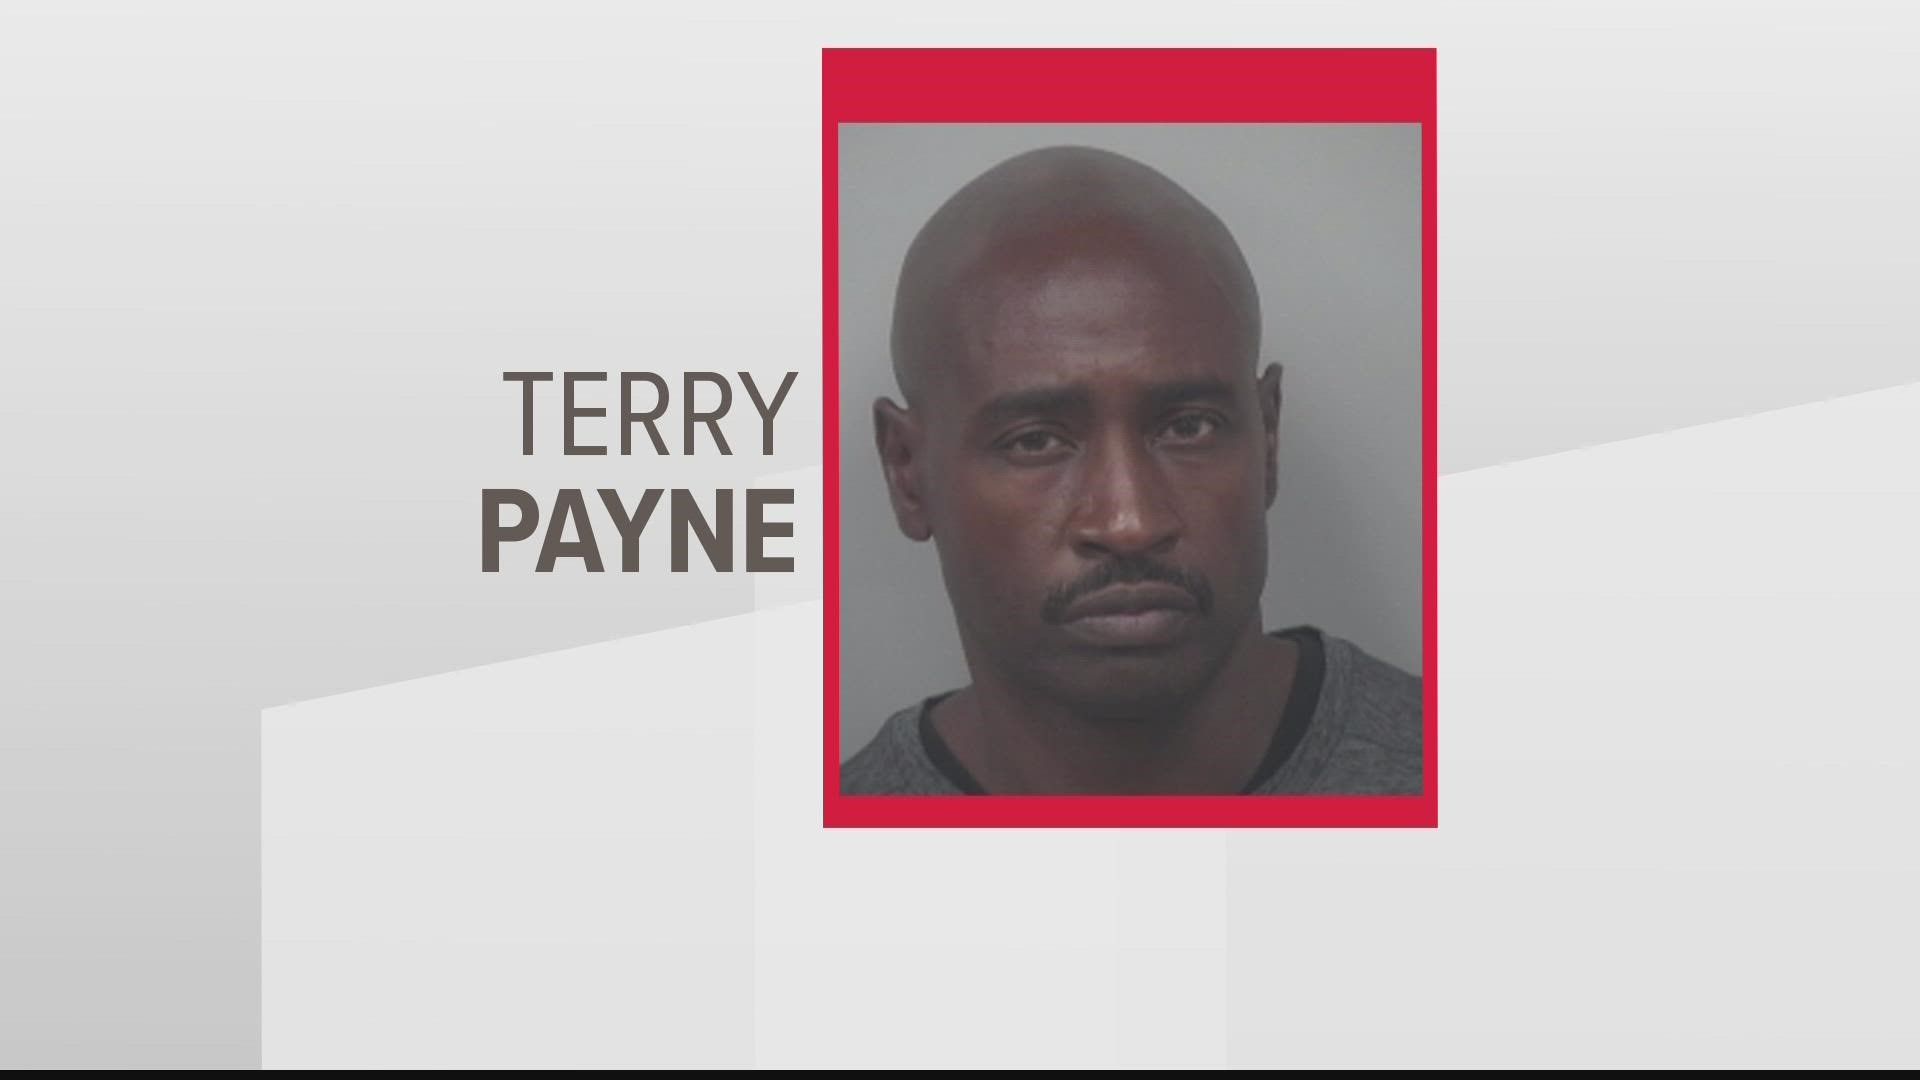 Detectives said their investigation led them to arrest Payne and learned he was employed as a police offer with GSU.